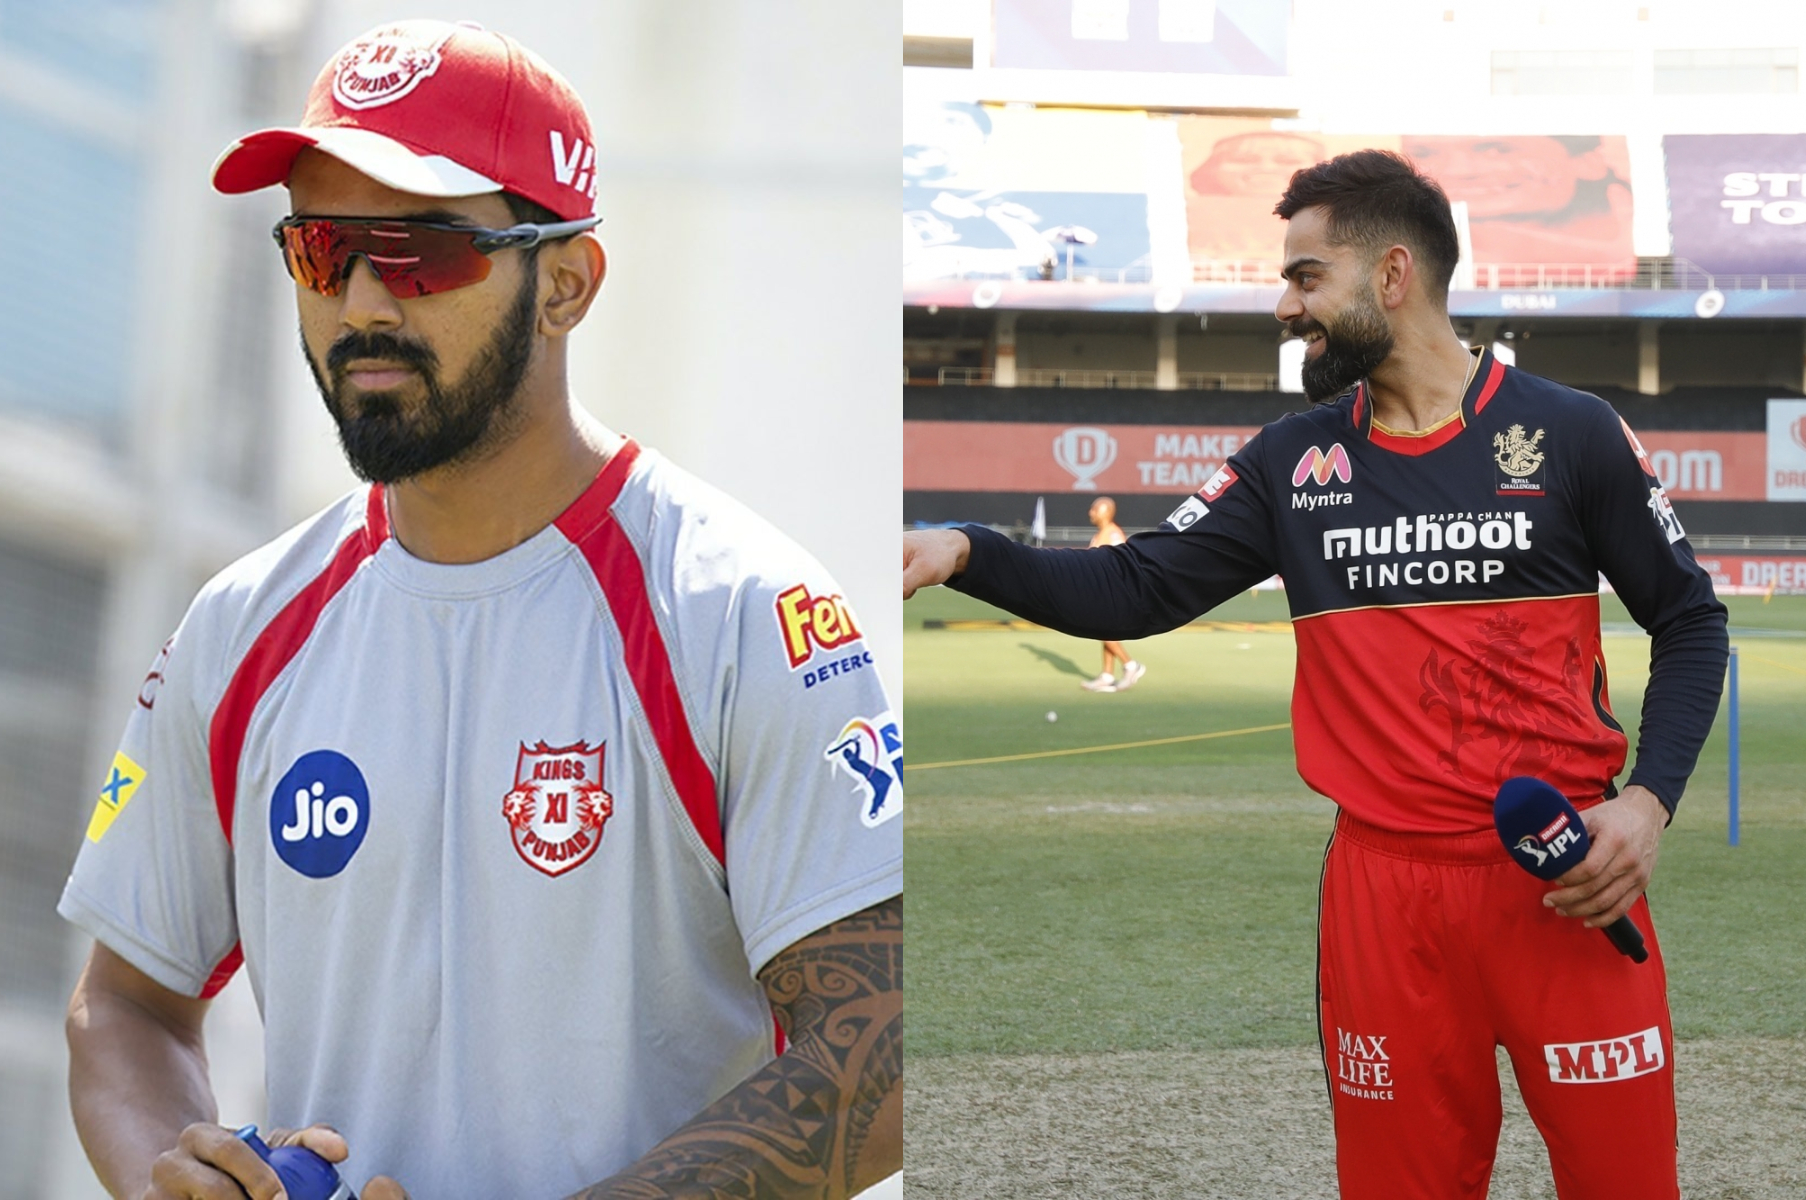 RCB will look to continue their winning ways; while KXIP would want to get on the points table with a win